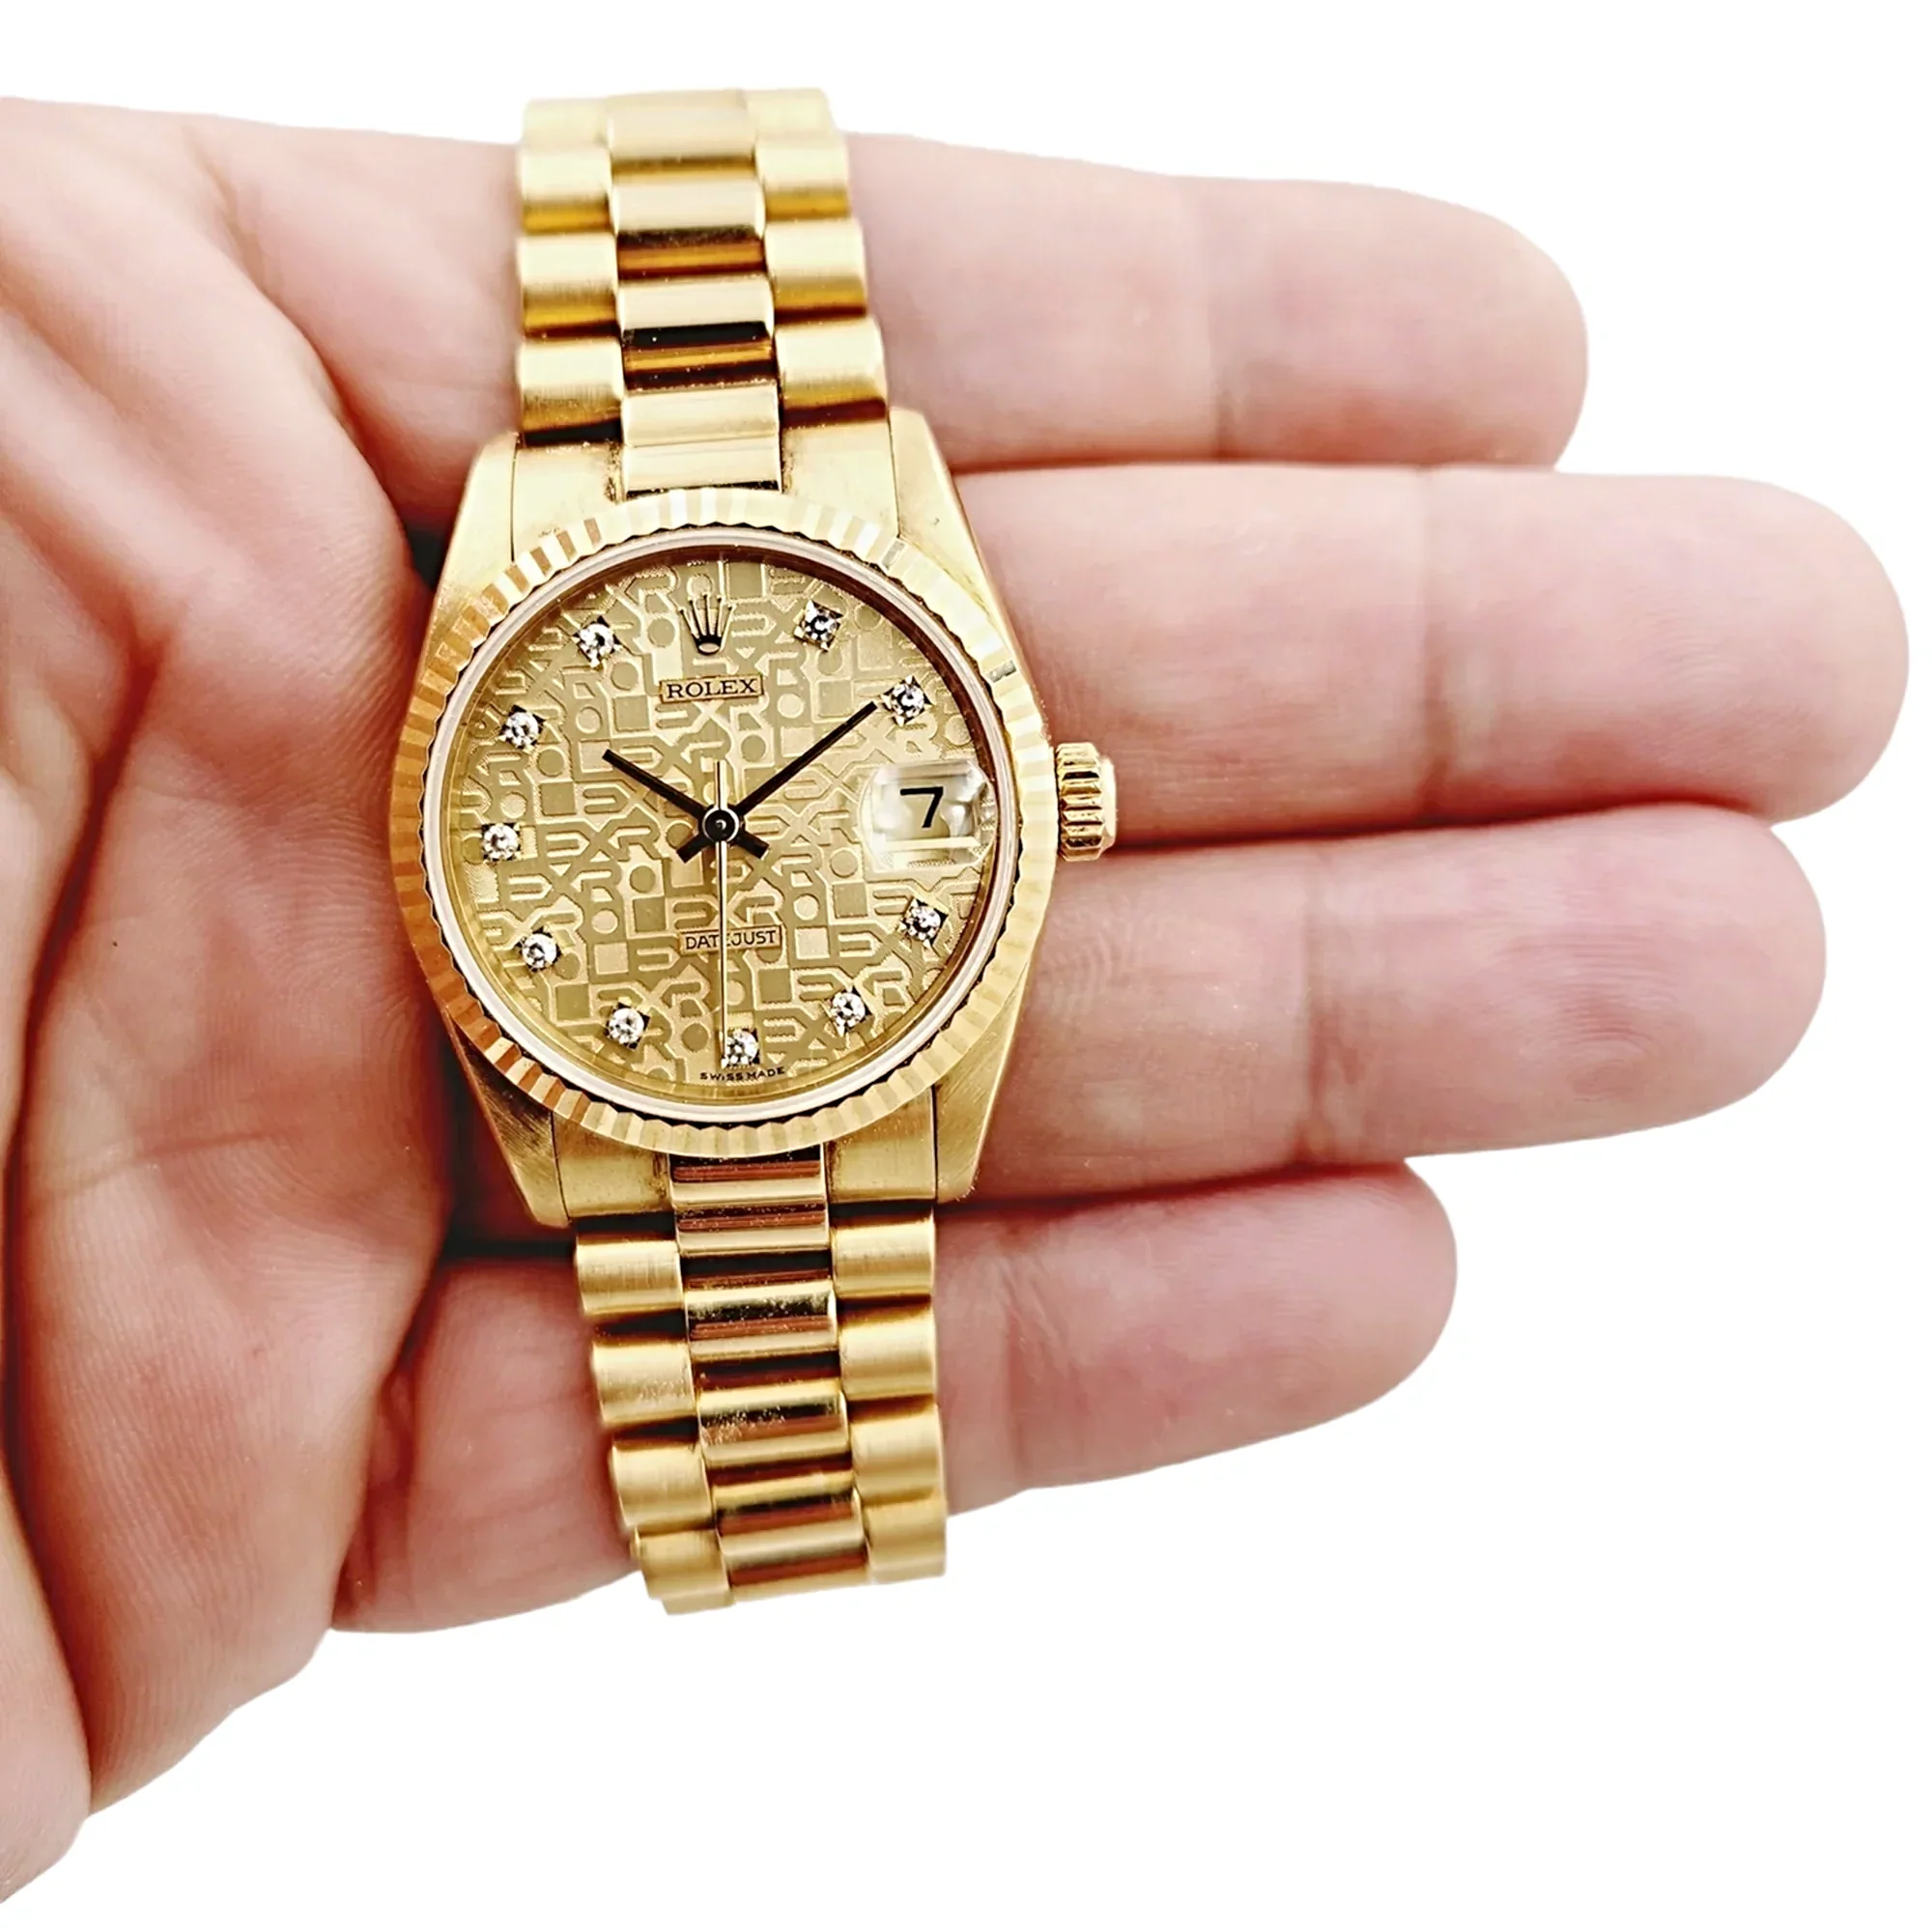 Ladies Rolex 31mm Midsize Presidential 18K Solid Yellow Gold Watch with Champagne Anniversary Diamond Dial and Fluted Bezel. (Pre-Owned 68278)